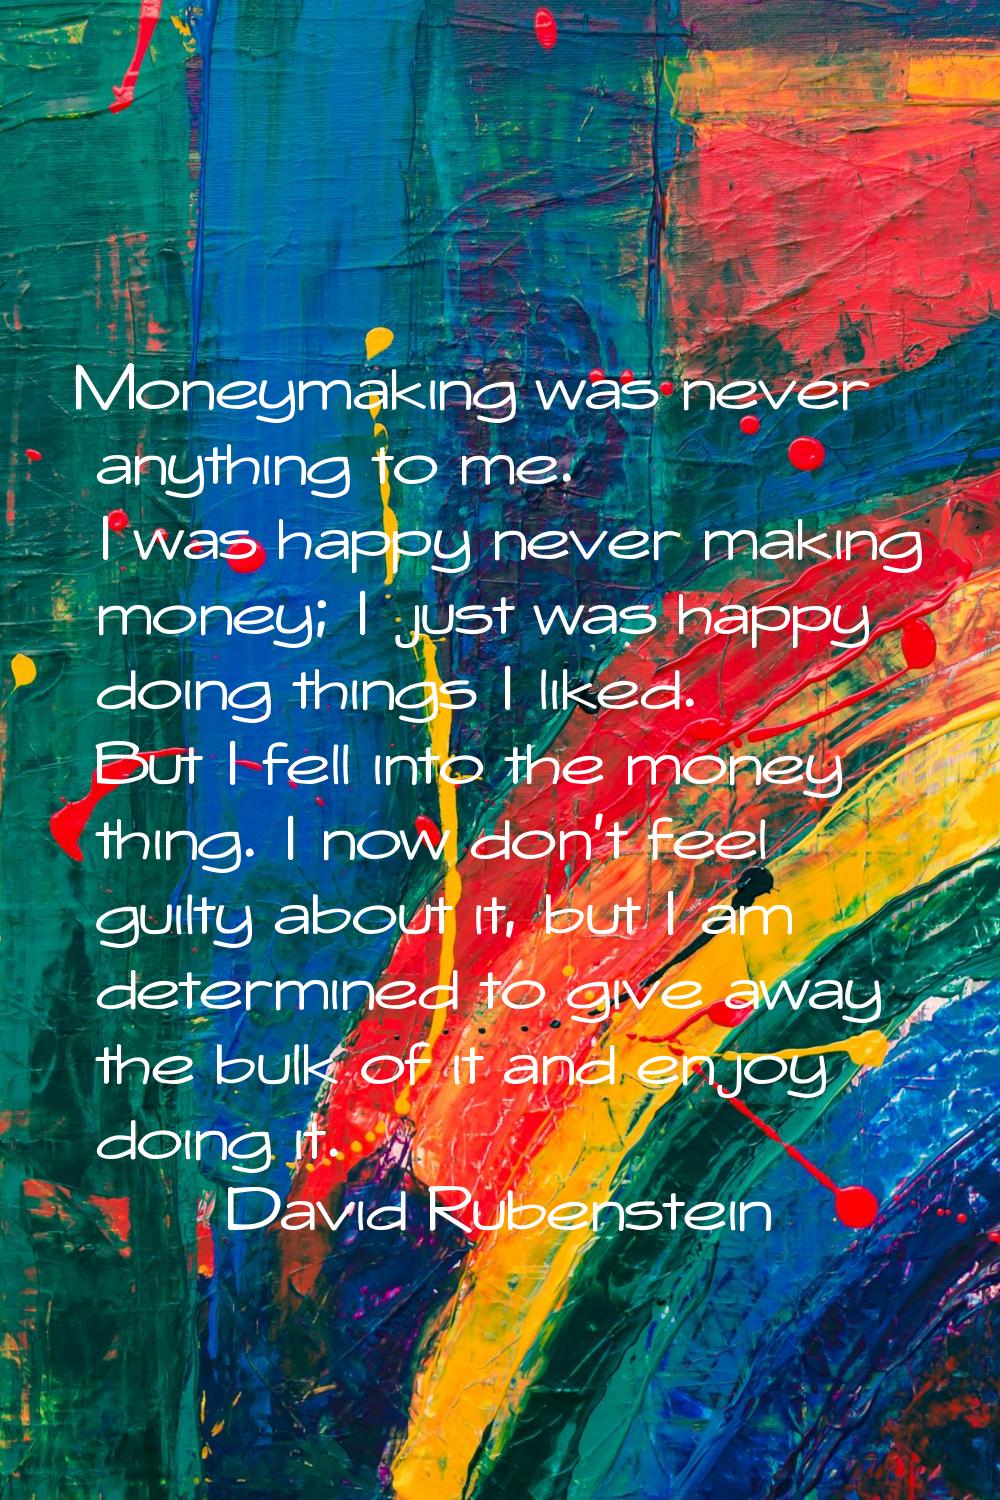 Moneymaking was never anything to me. I was happy never making money; I just was happy doing things